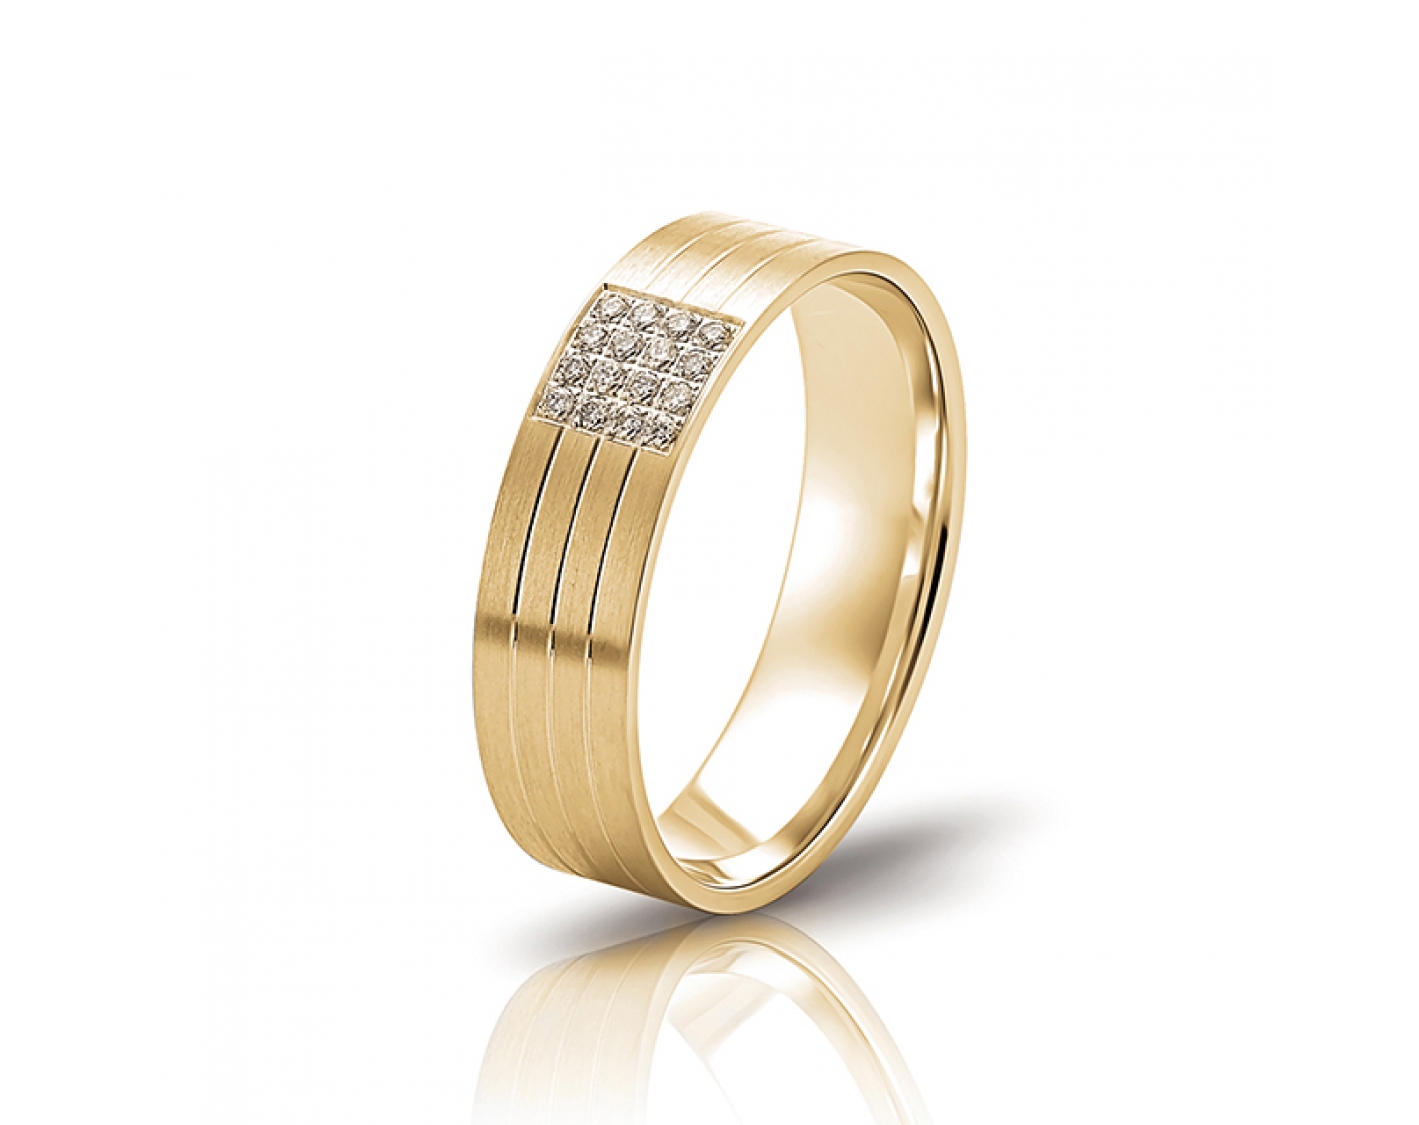 18k yellow gold 6mm matte wedding band with diamonds and inlays